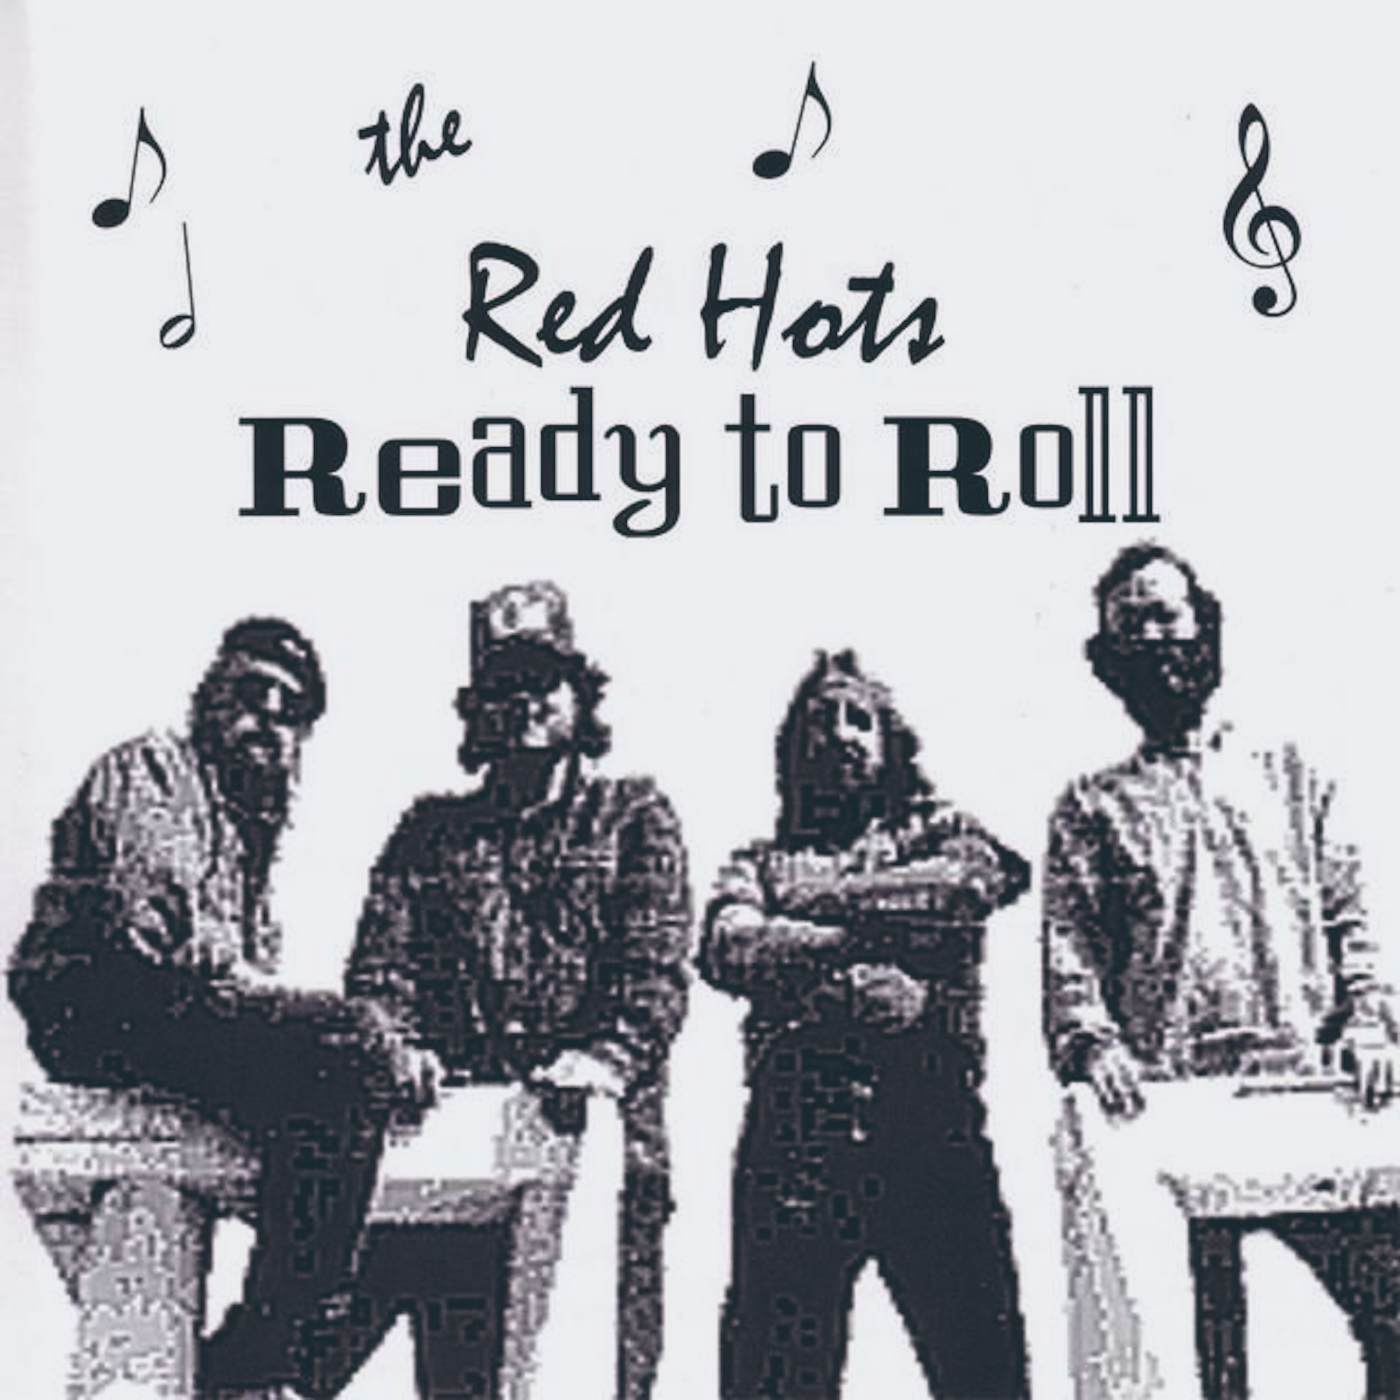 The Red Hots